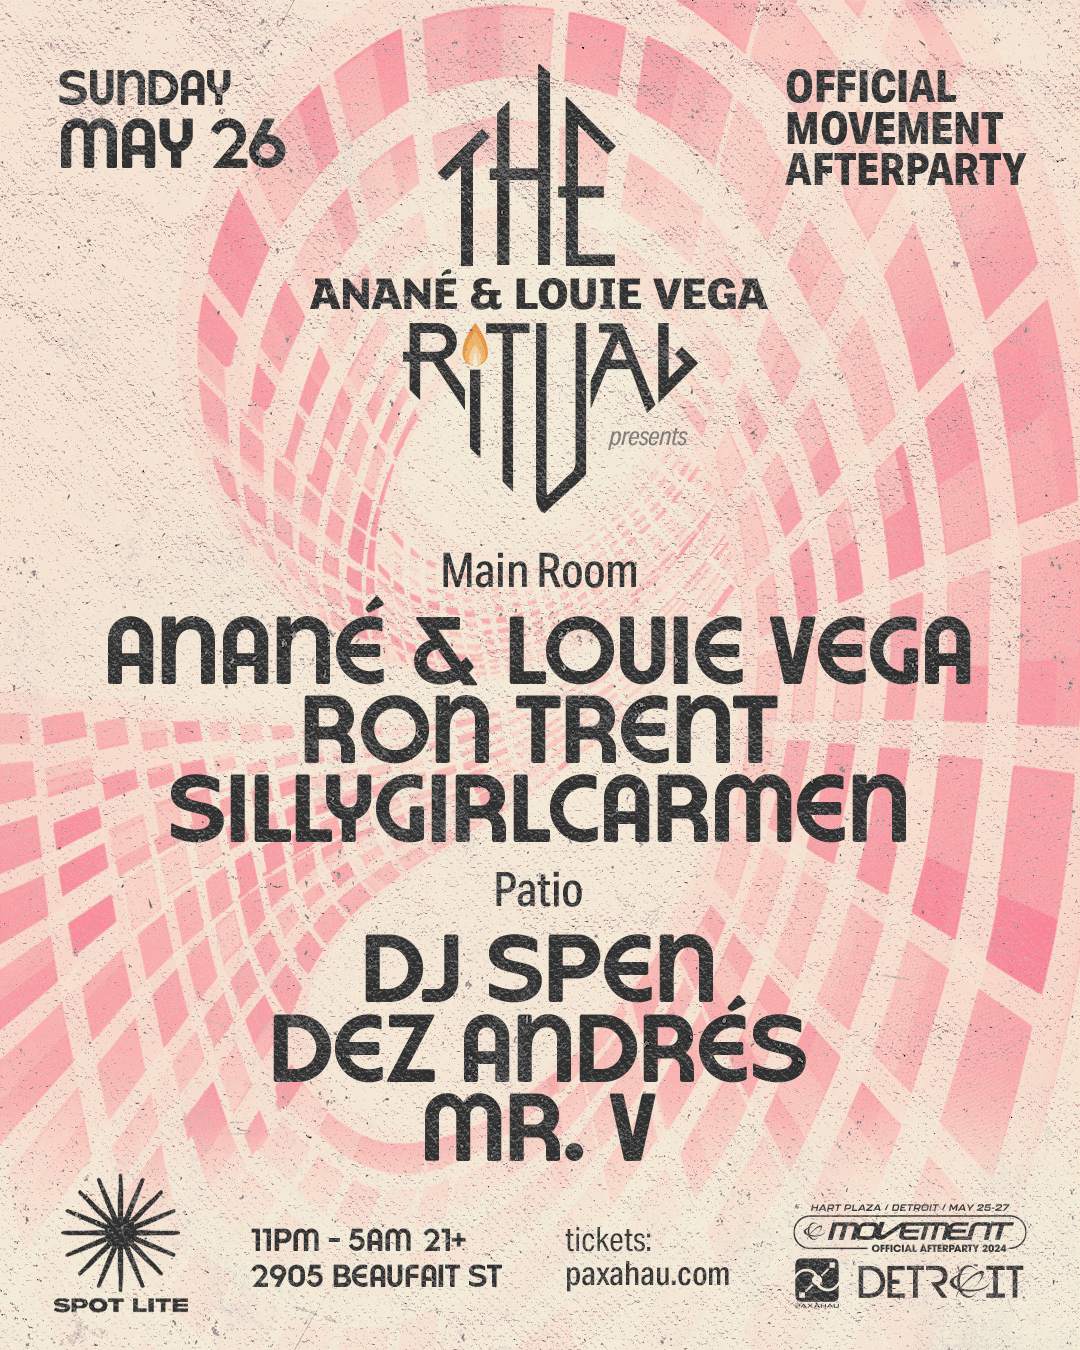 The Ritual with Anané & Louie Vega - Official Movement Afterparty - Página frontal